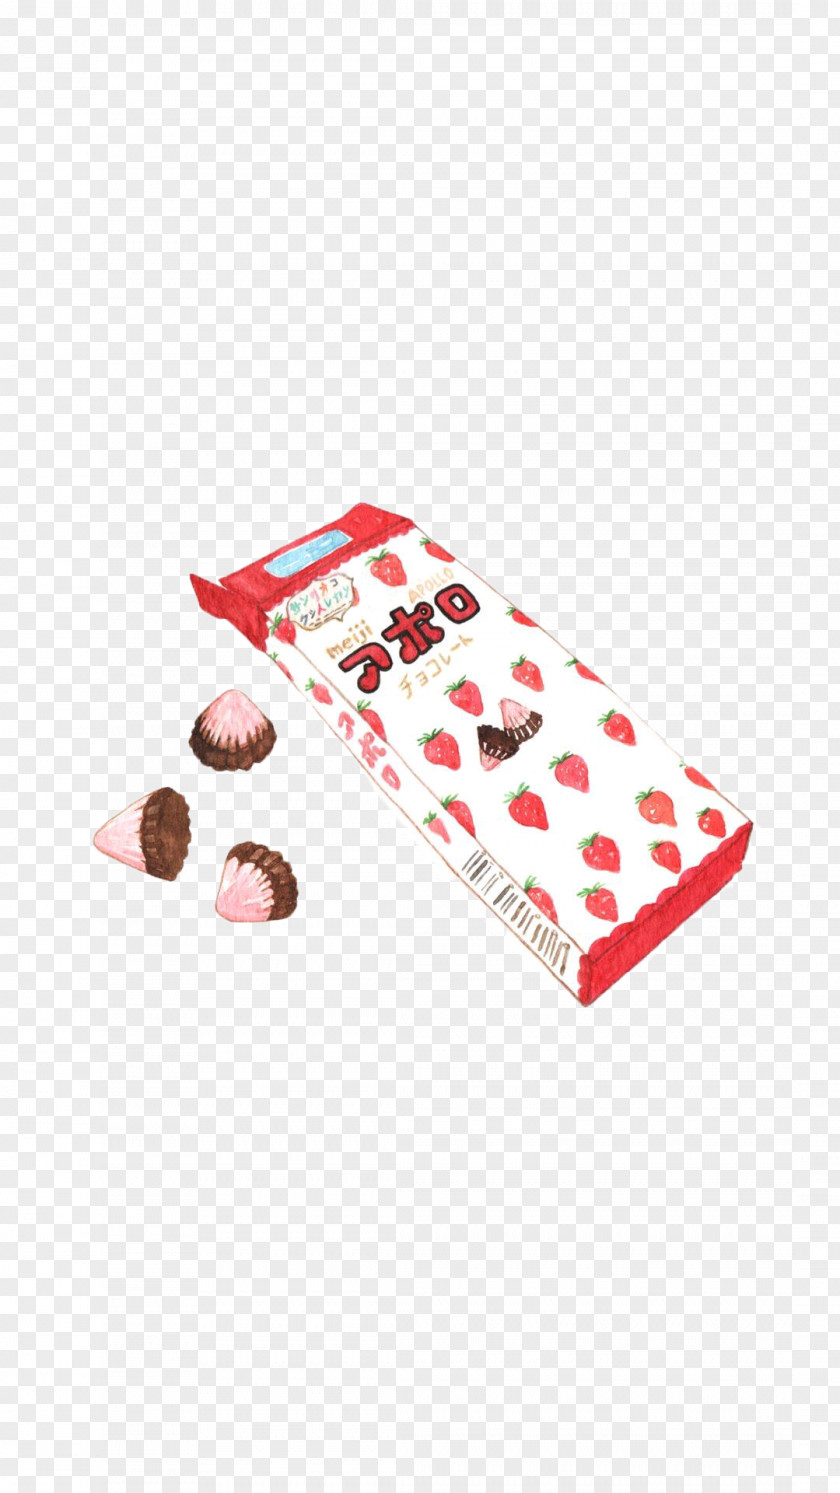 Cookies Illustration Ice Cream Chewing Gum Strawberry Breakfast Sugar PNG